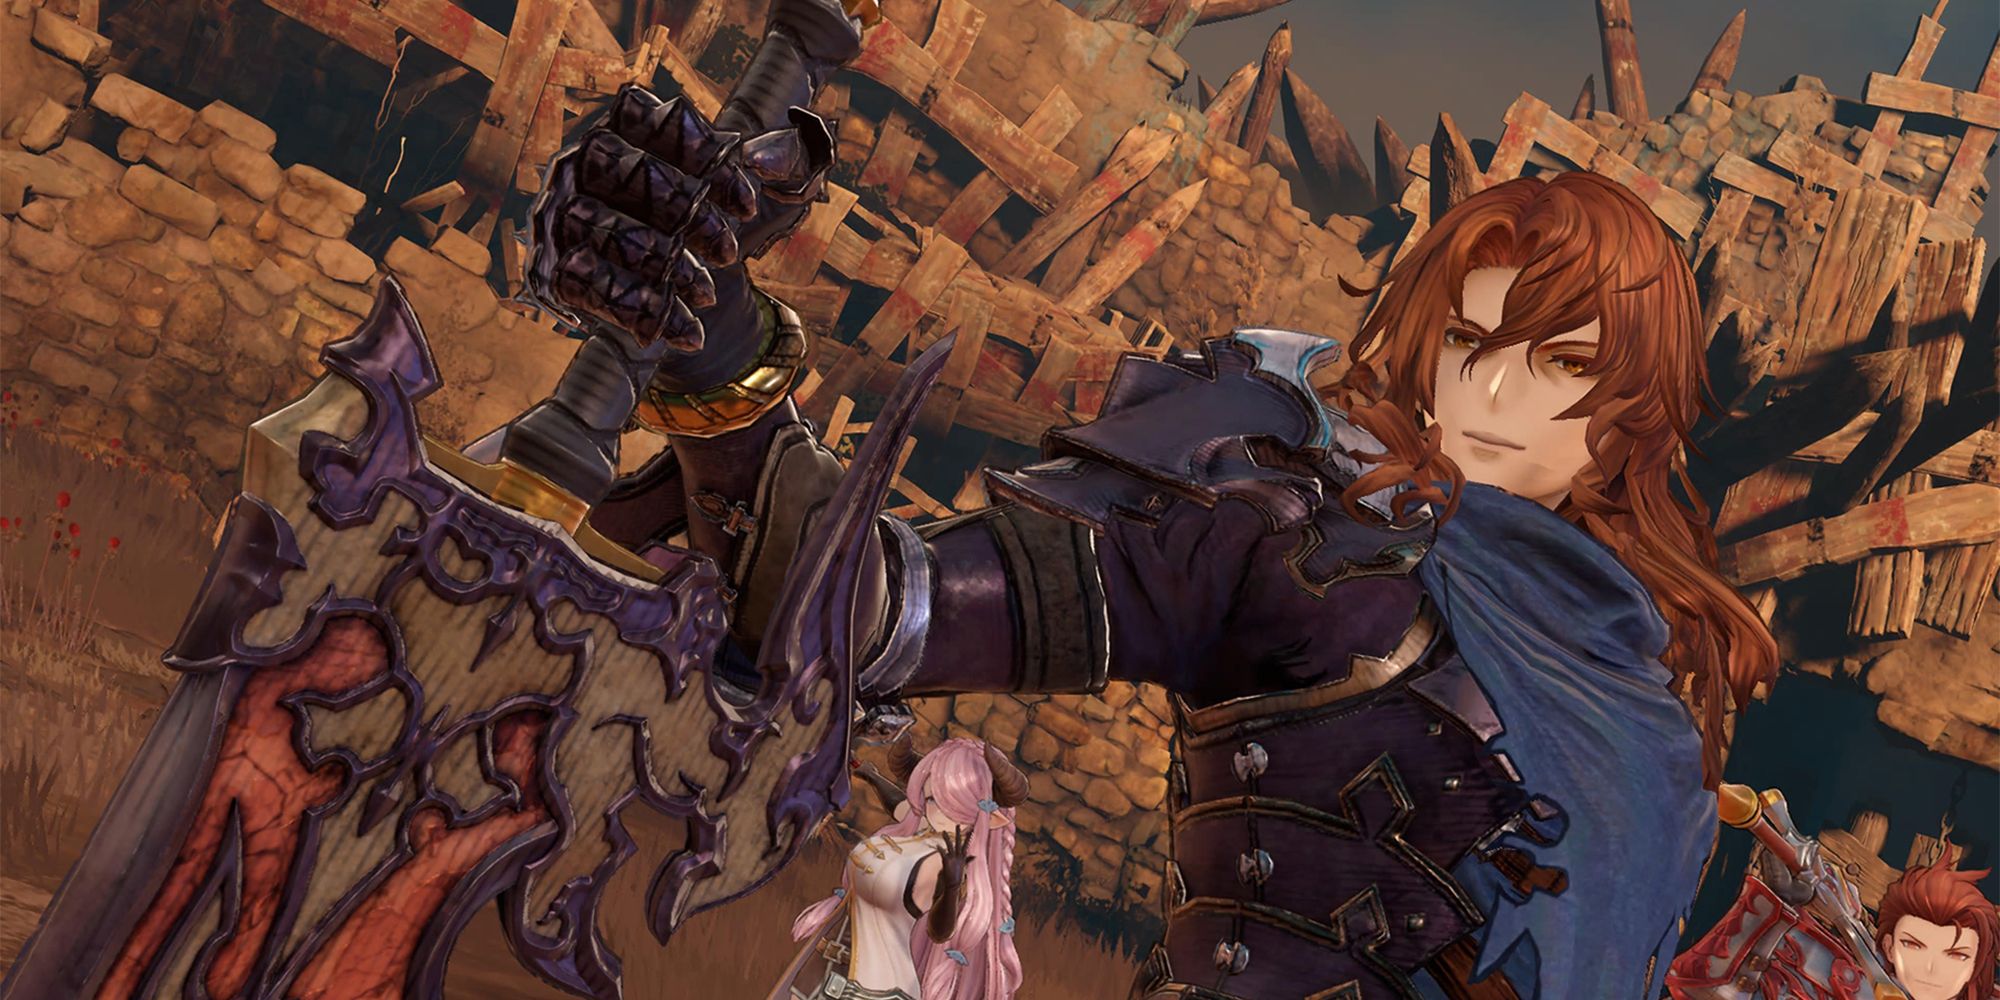 siegfried victory pose at end of mission